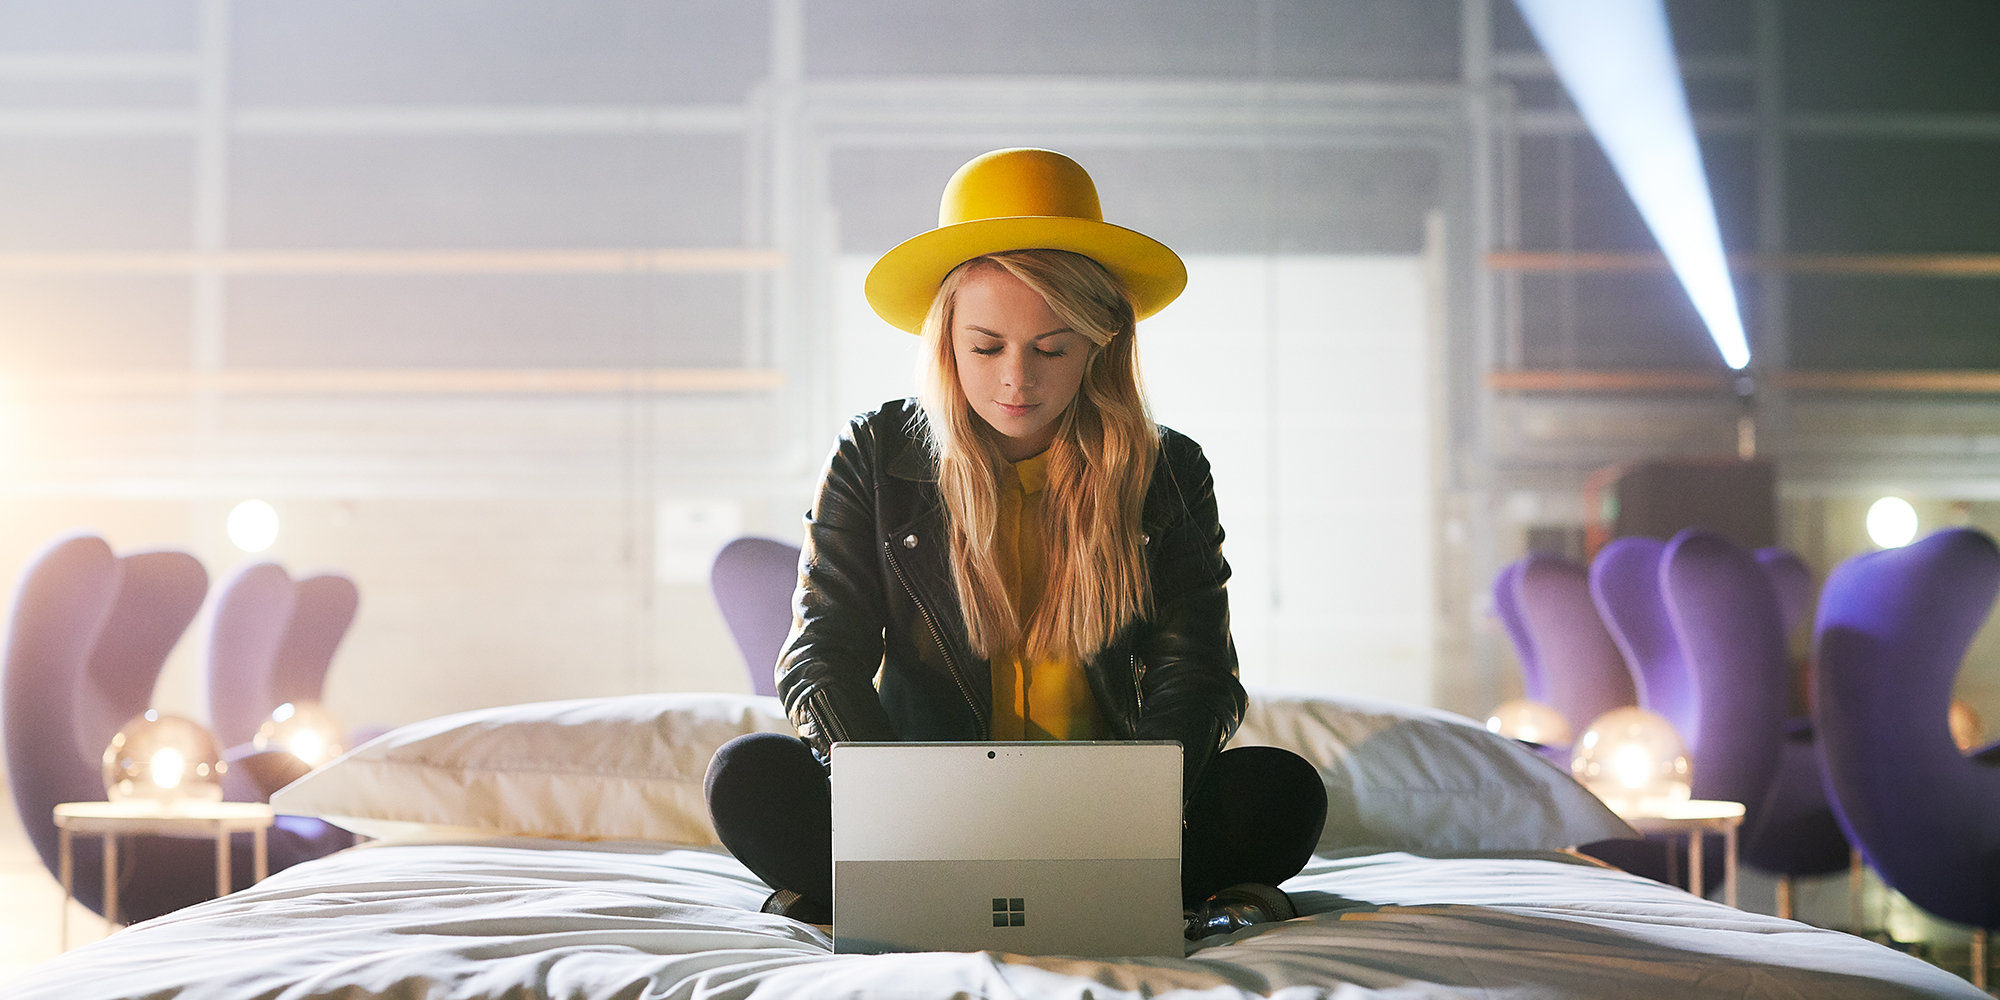 A woman with a yellow hat working on a Surface